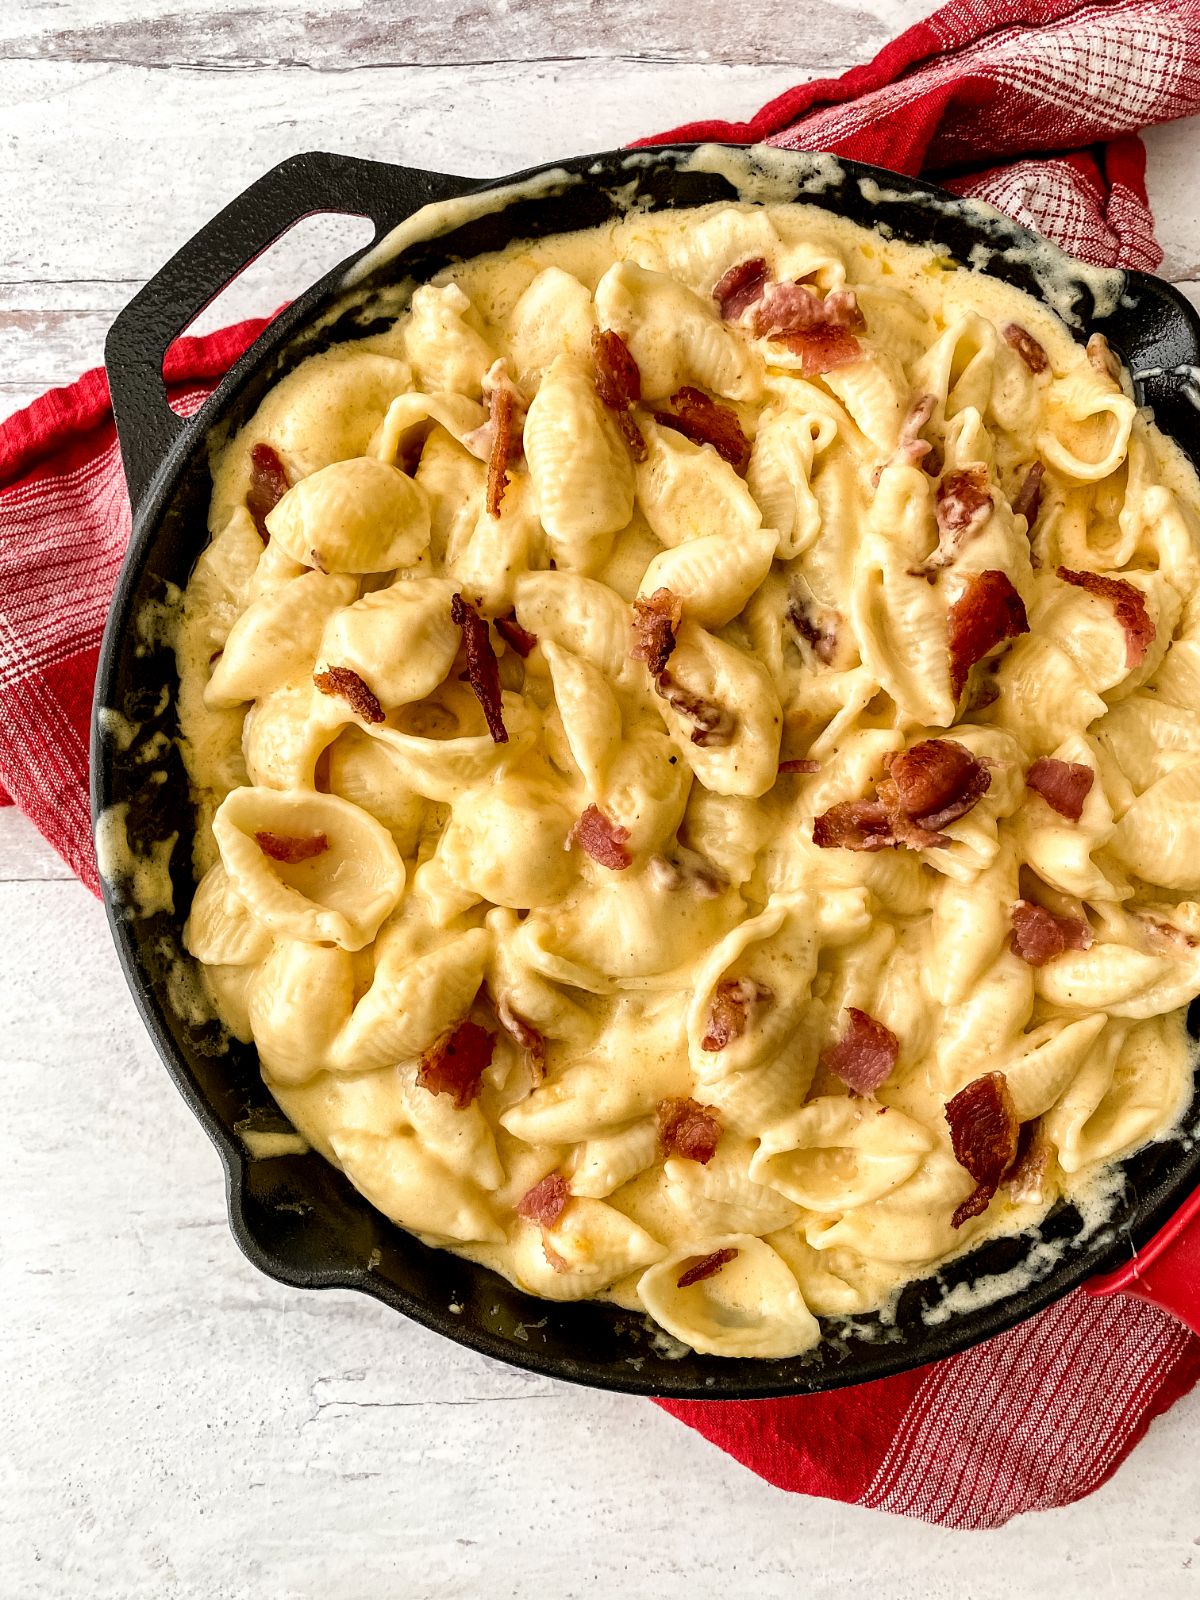 cast iron skillet on red napkin filled with bacon shells and cheese